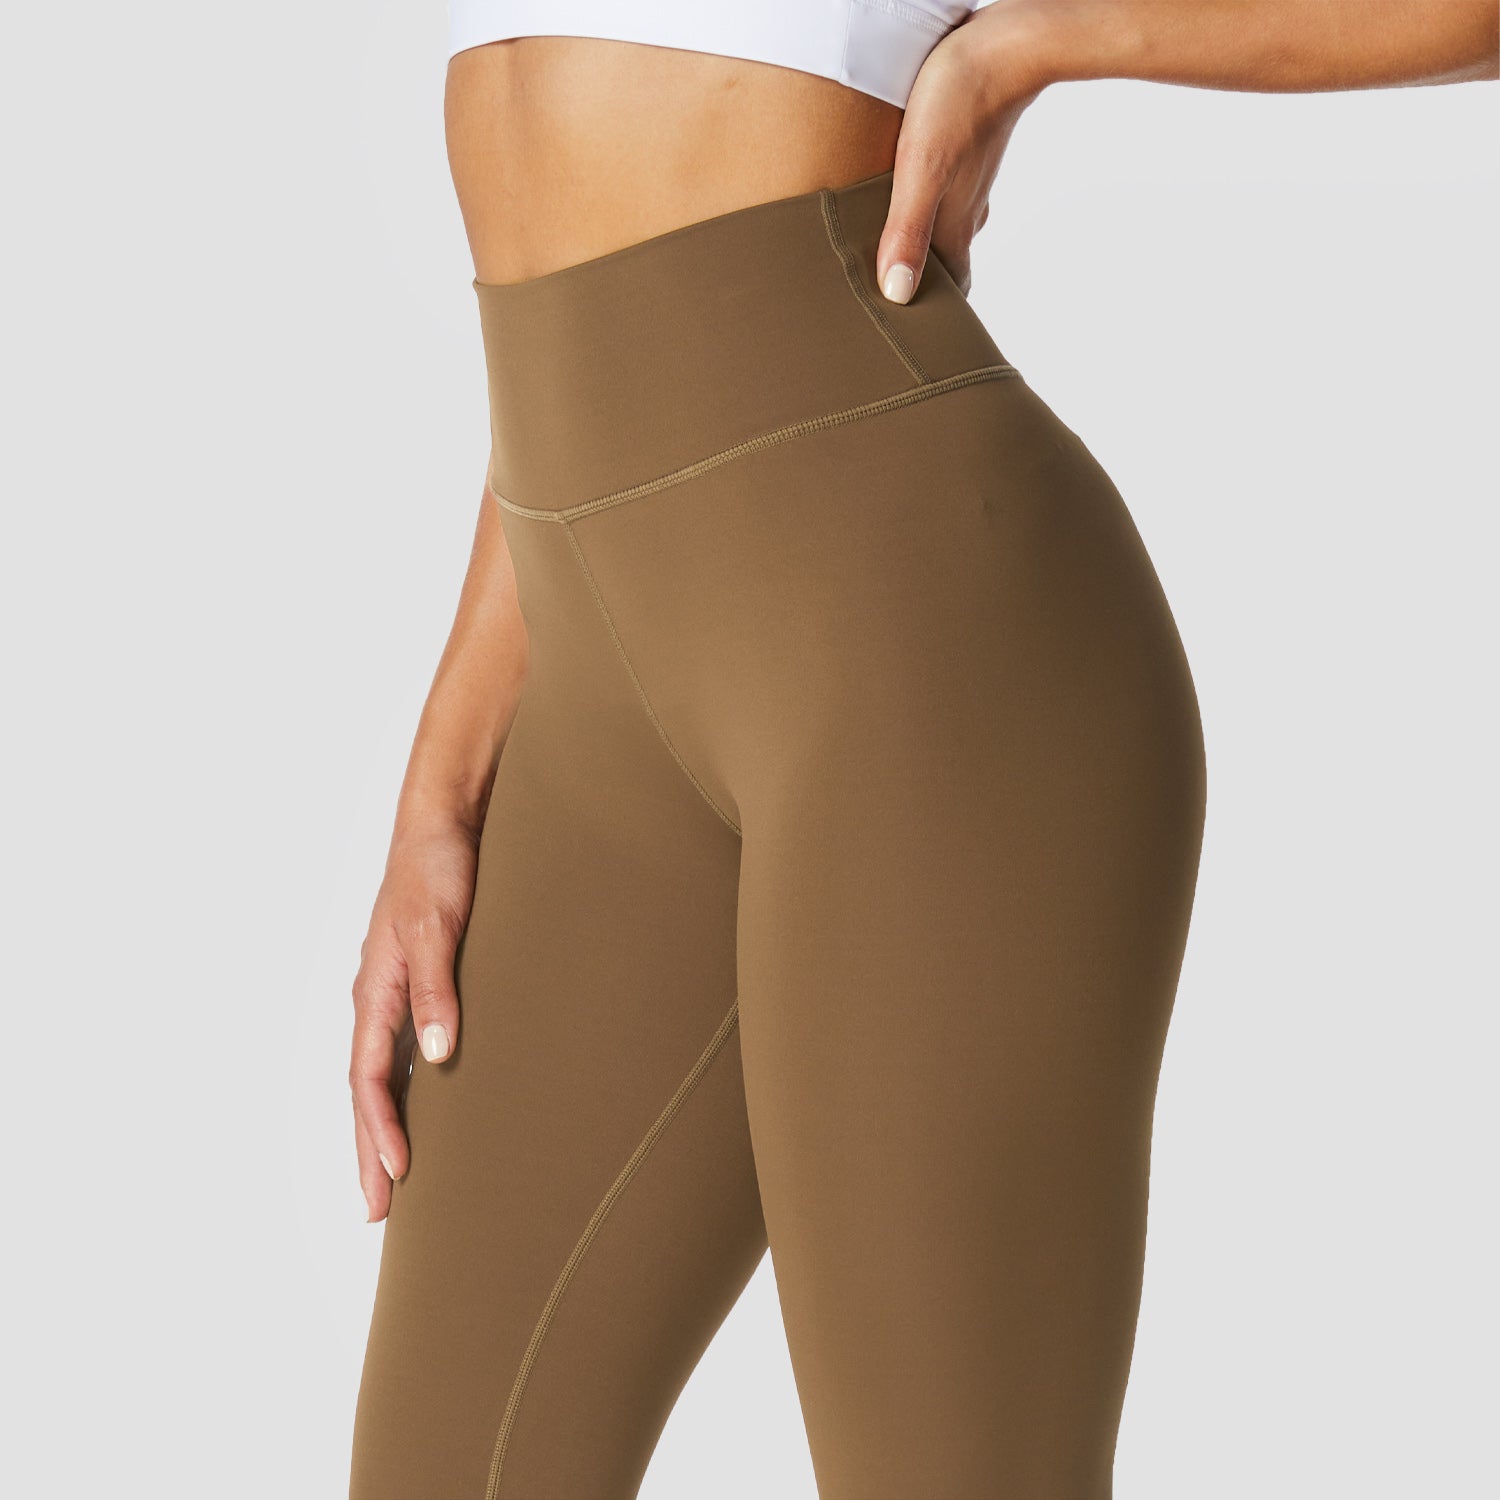 squatwolf-workout-clothes-womens-fitness-7-8-leggings-gold-gym-leggings-for-women